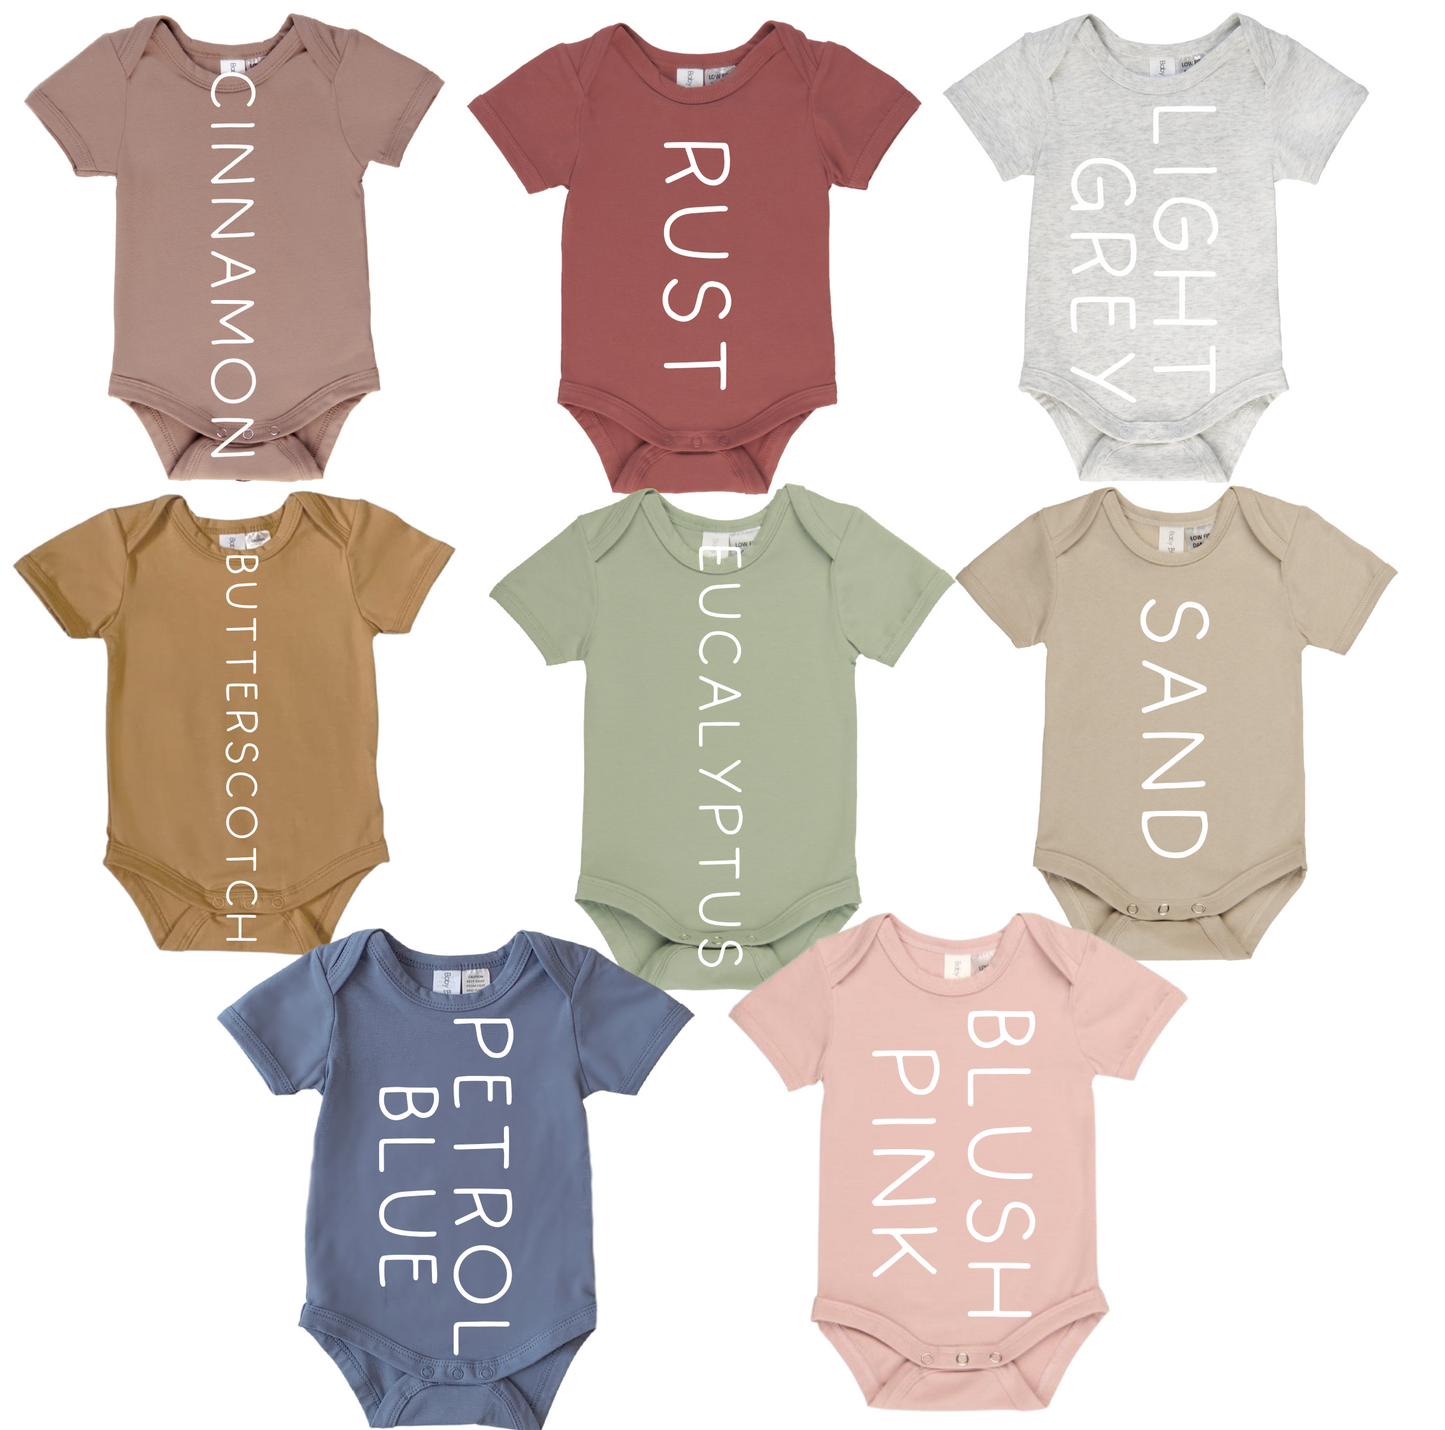 Customisable Baby Announcement Onesie 'How Does...Sound?'